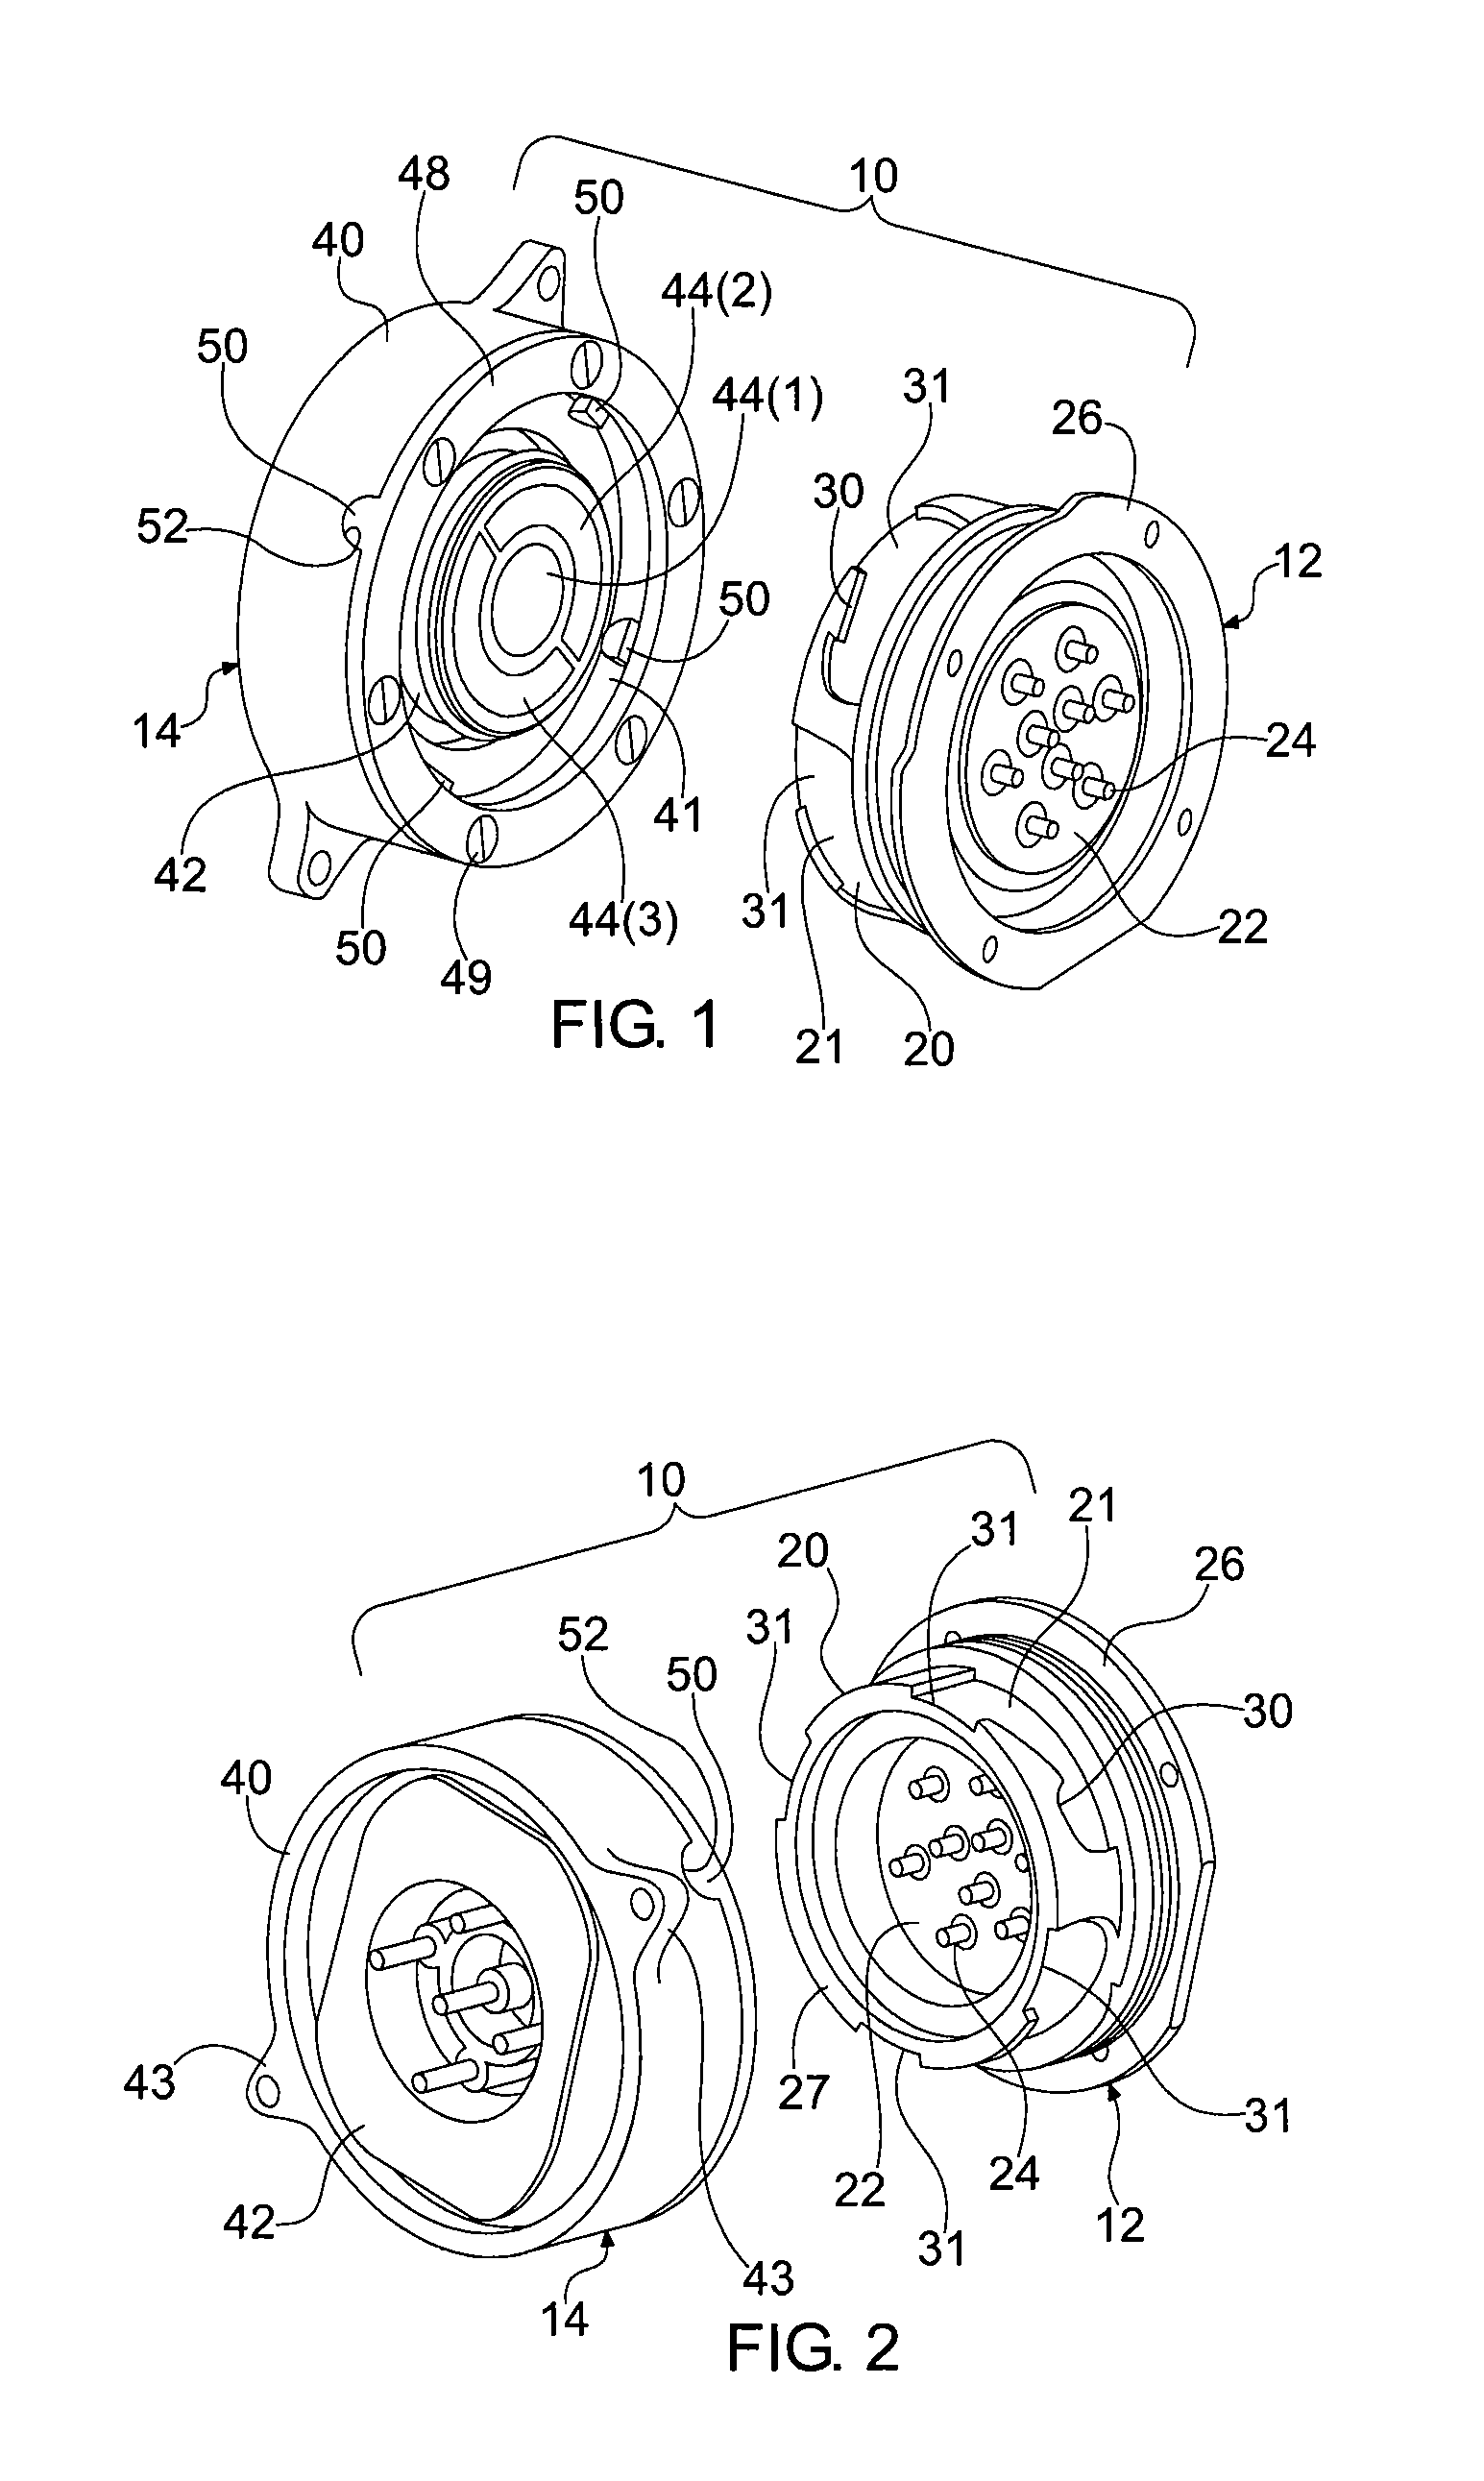 Electrical connector including a bayonet locking device